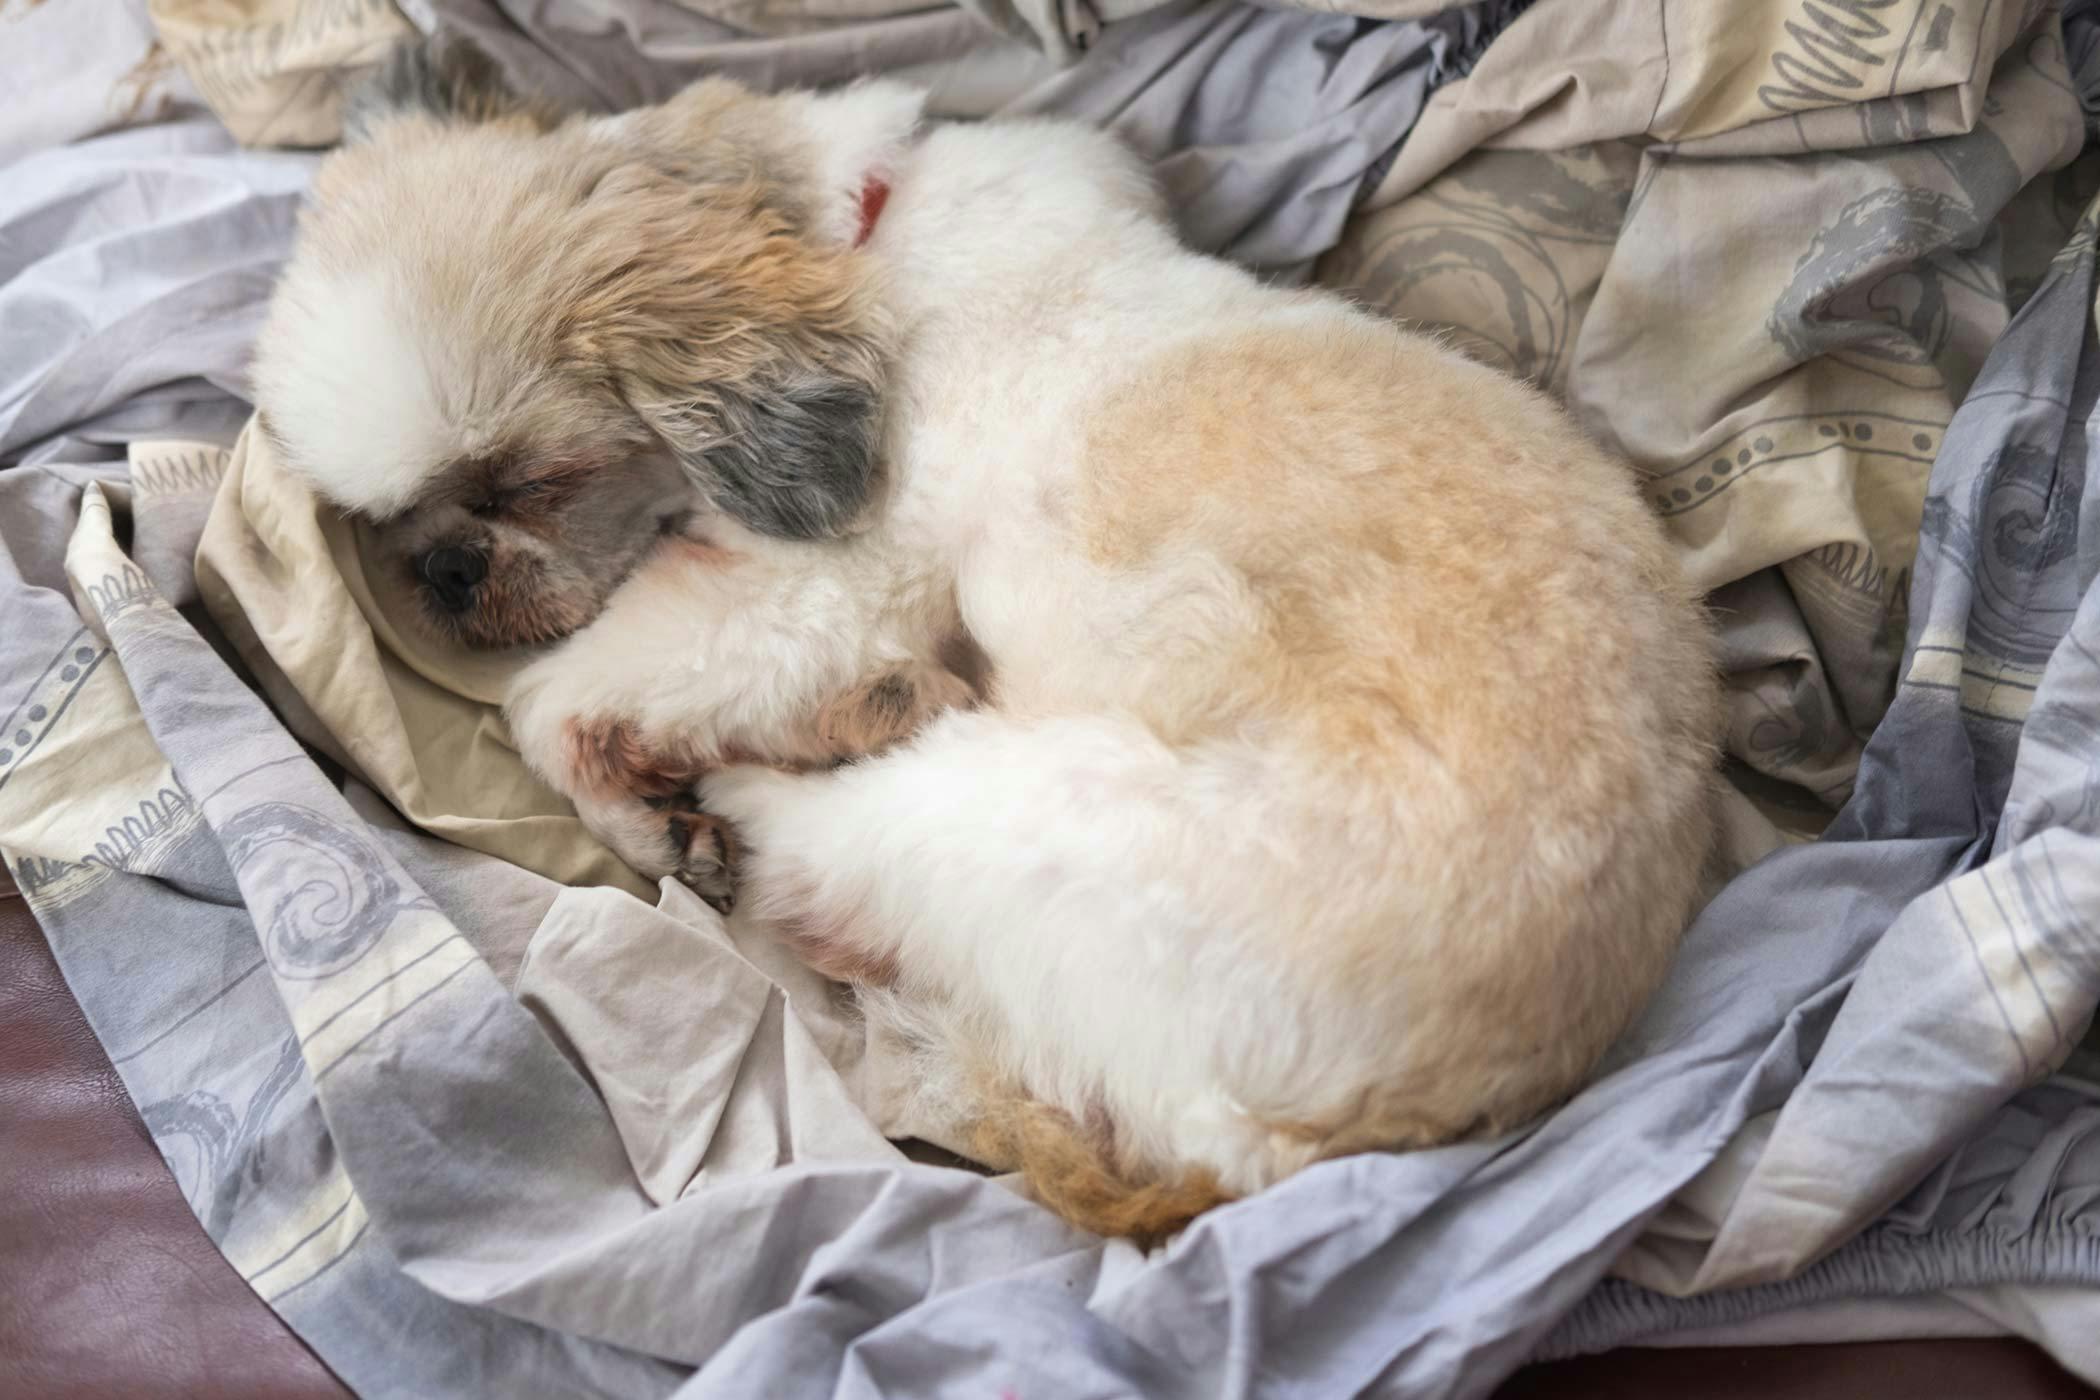 A small dog curled up and sleeping on a blanket.